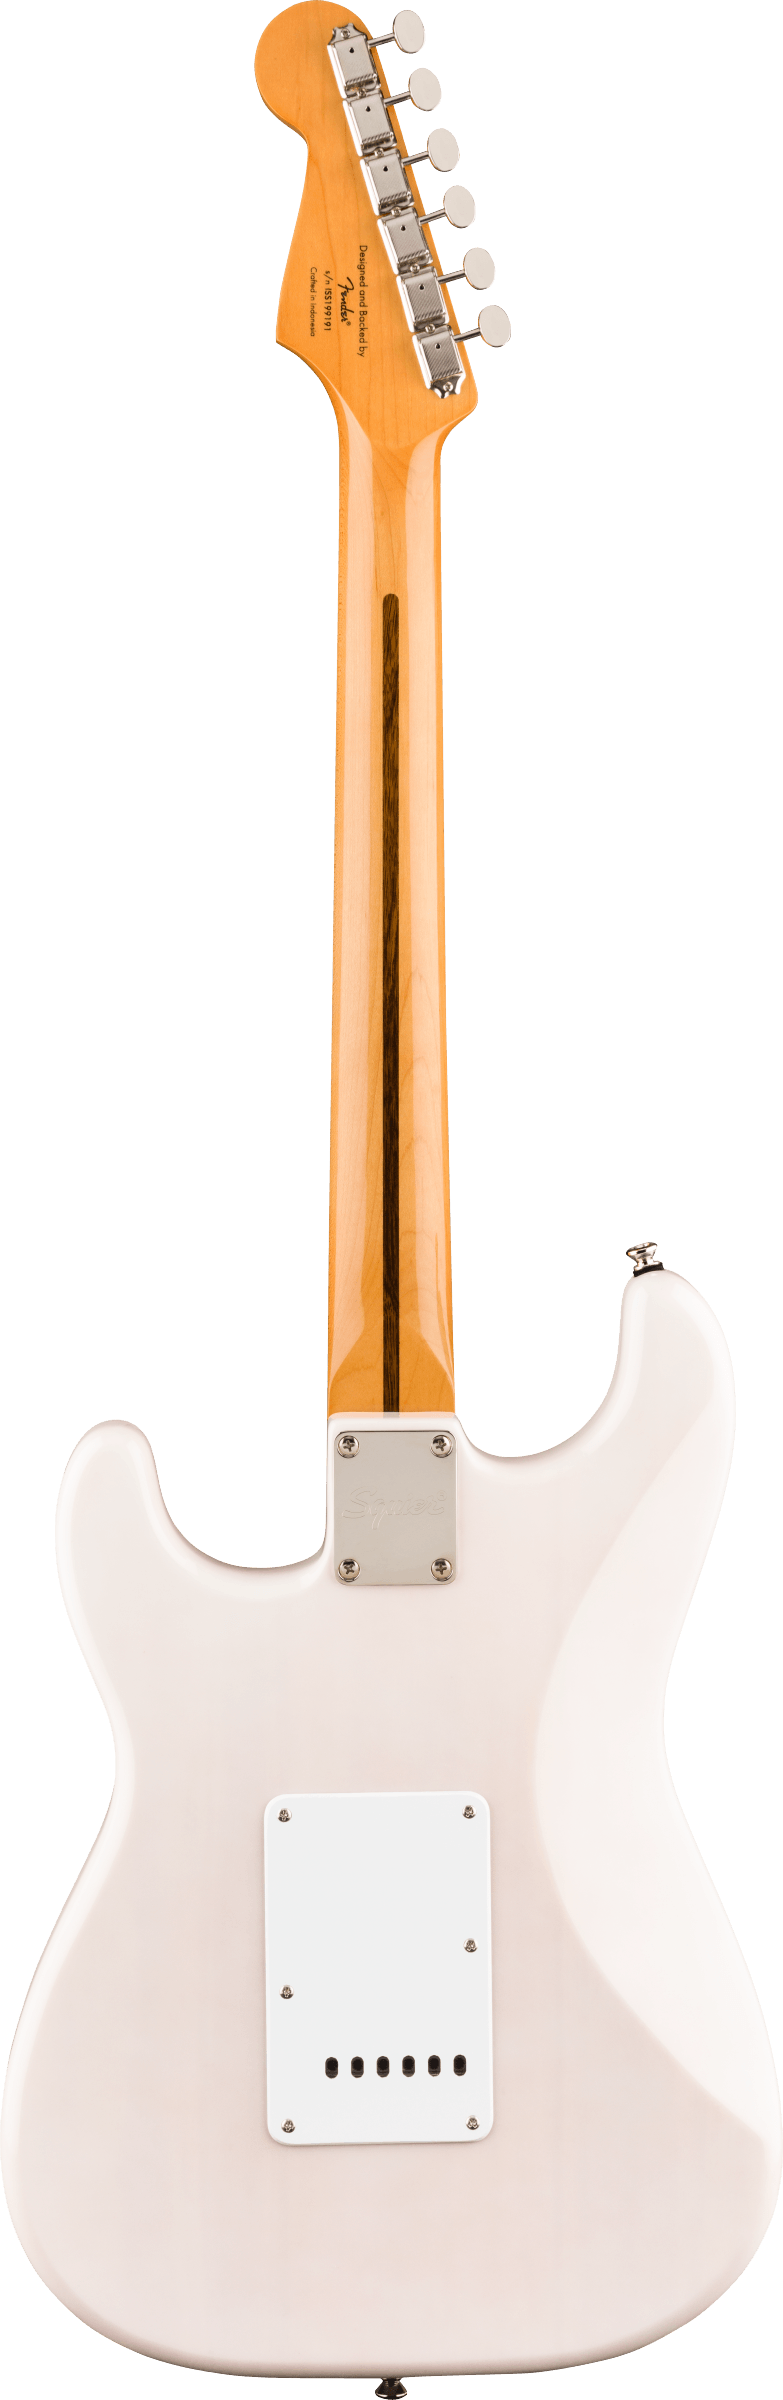 Squier Classic Vibe 50s Stratocaster Maple Fingerboard White Blonde